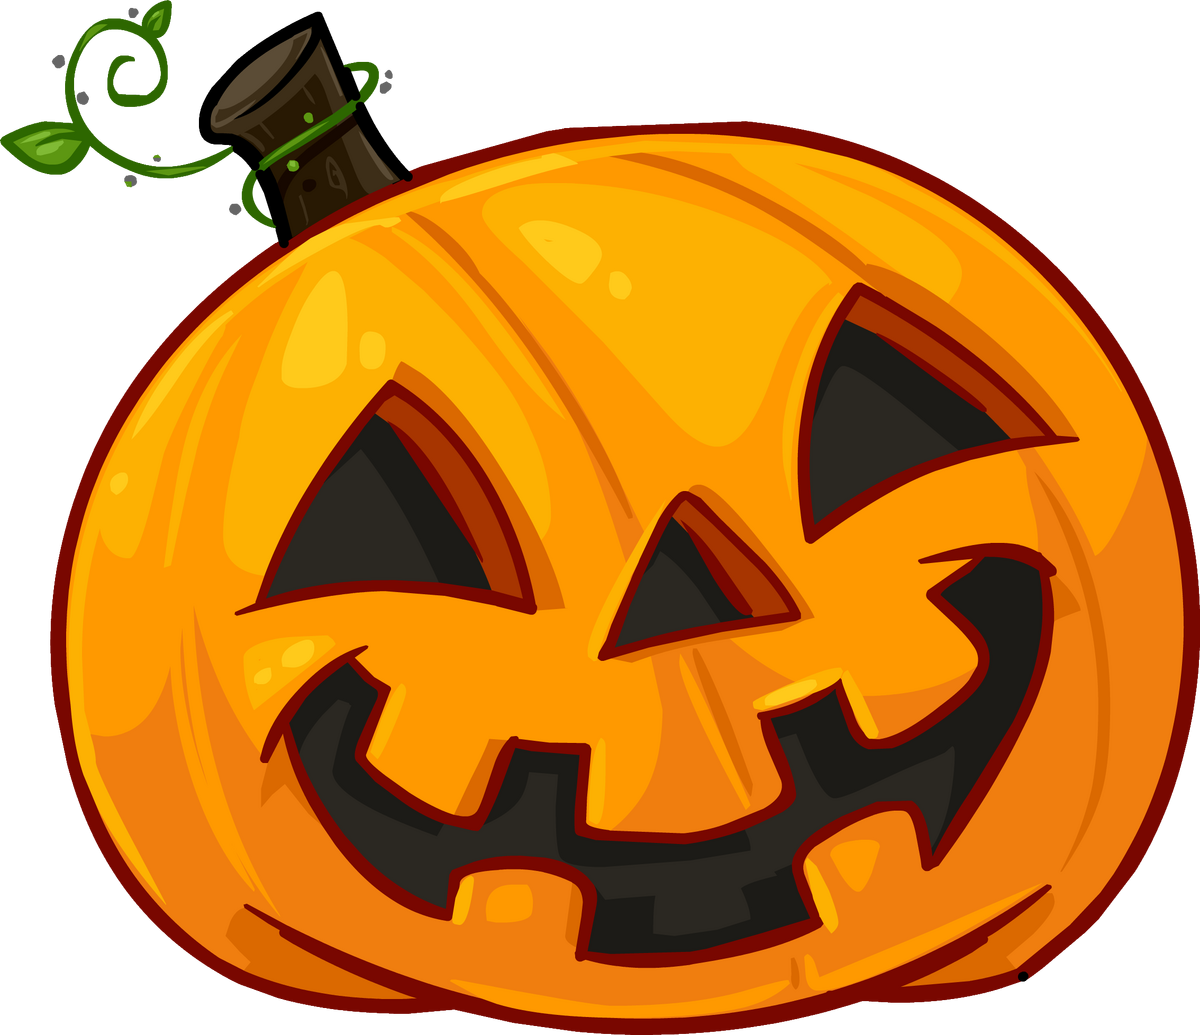 Pumpkin Halloween Clipart PNG for crafts and sublimation